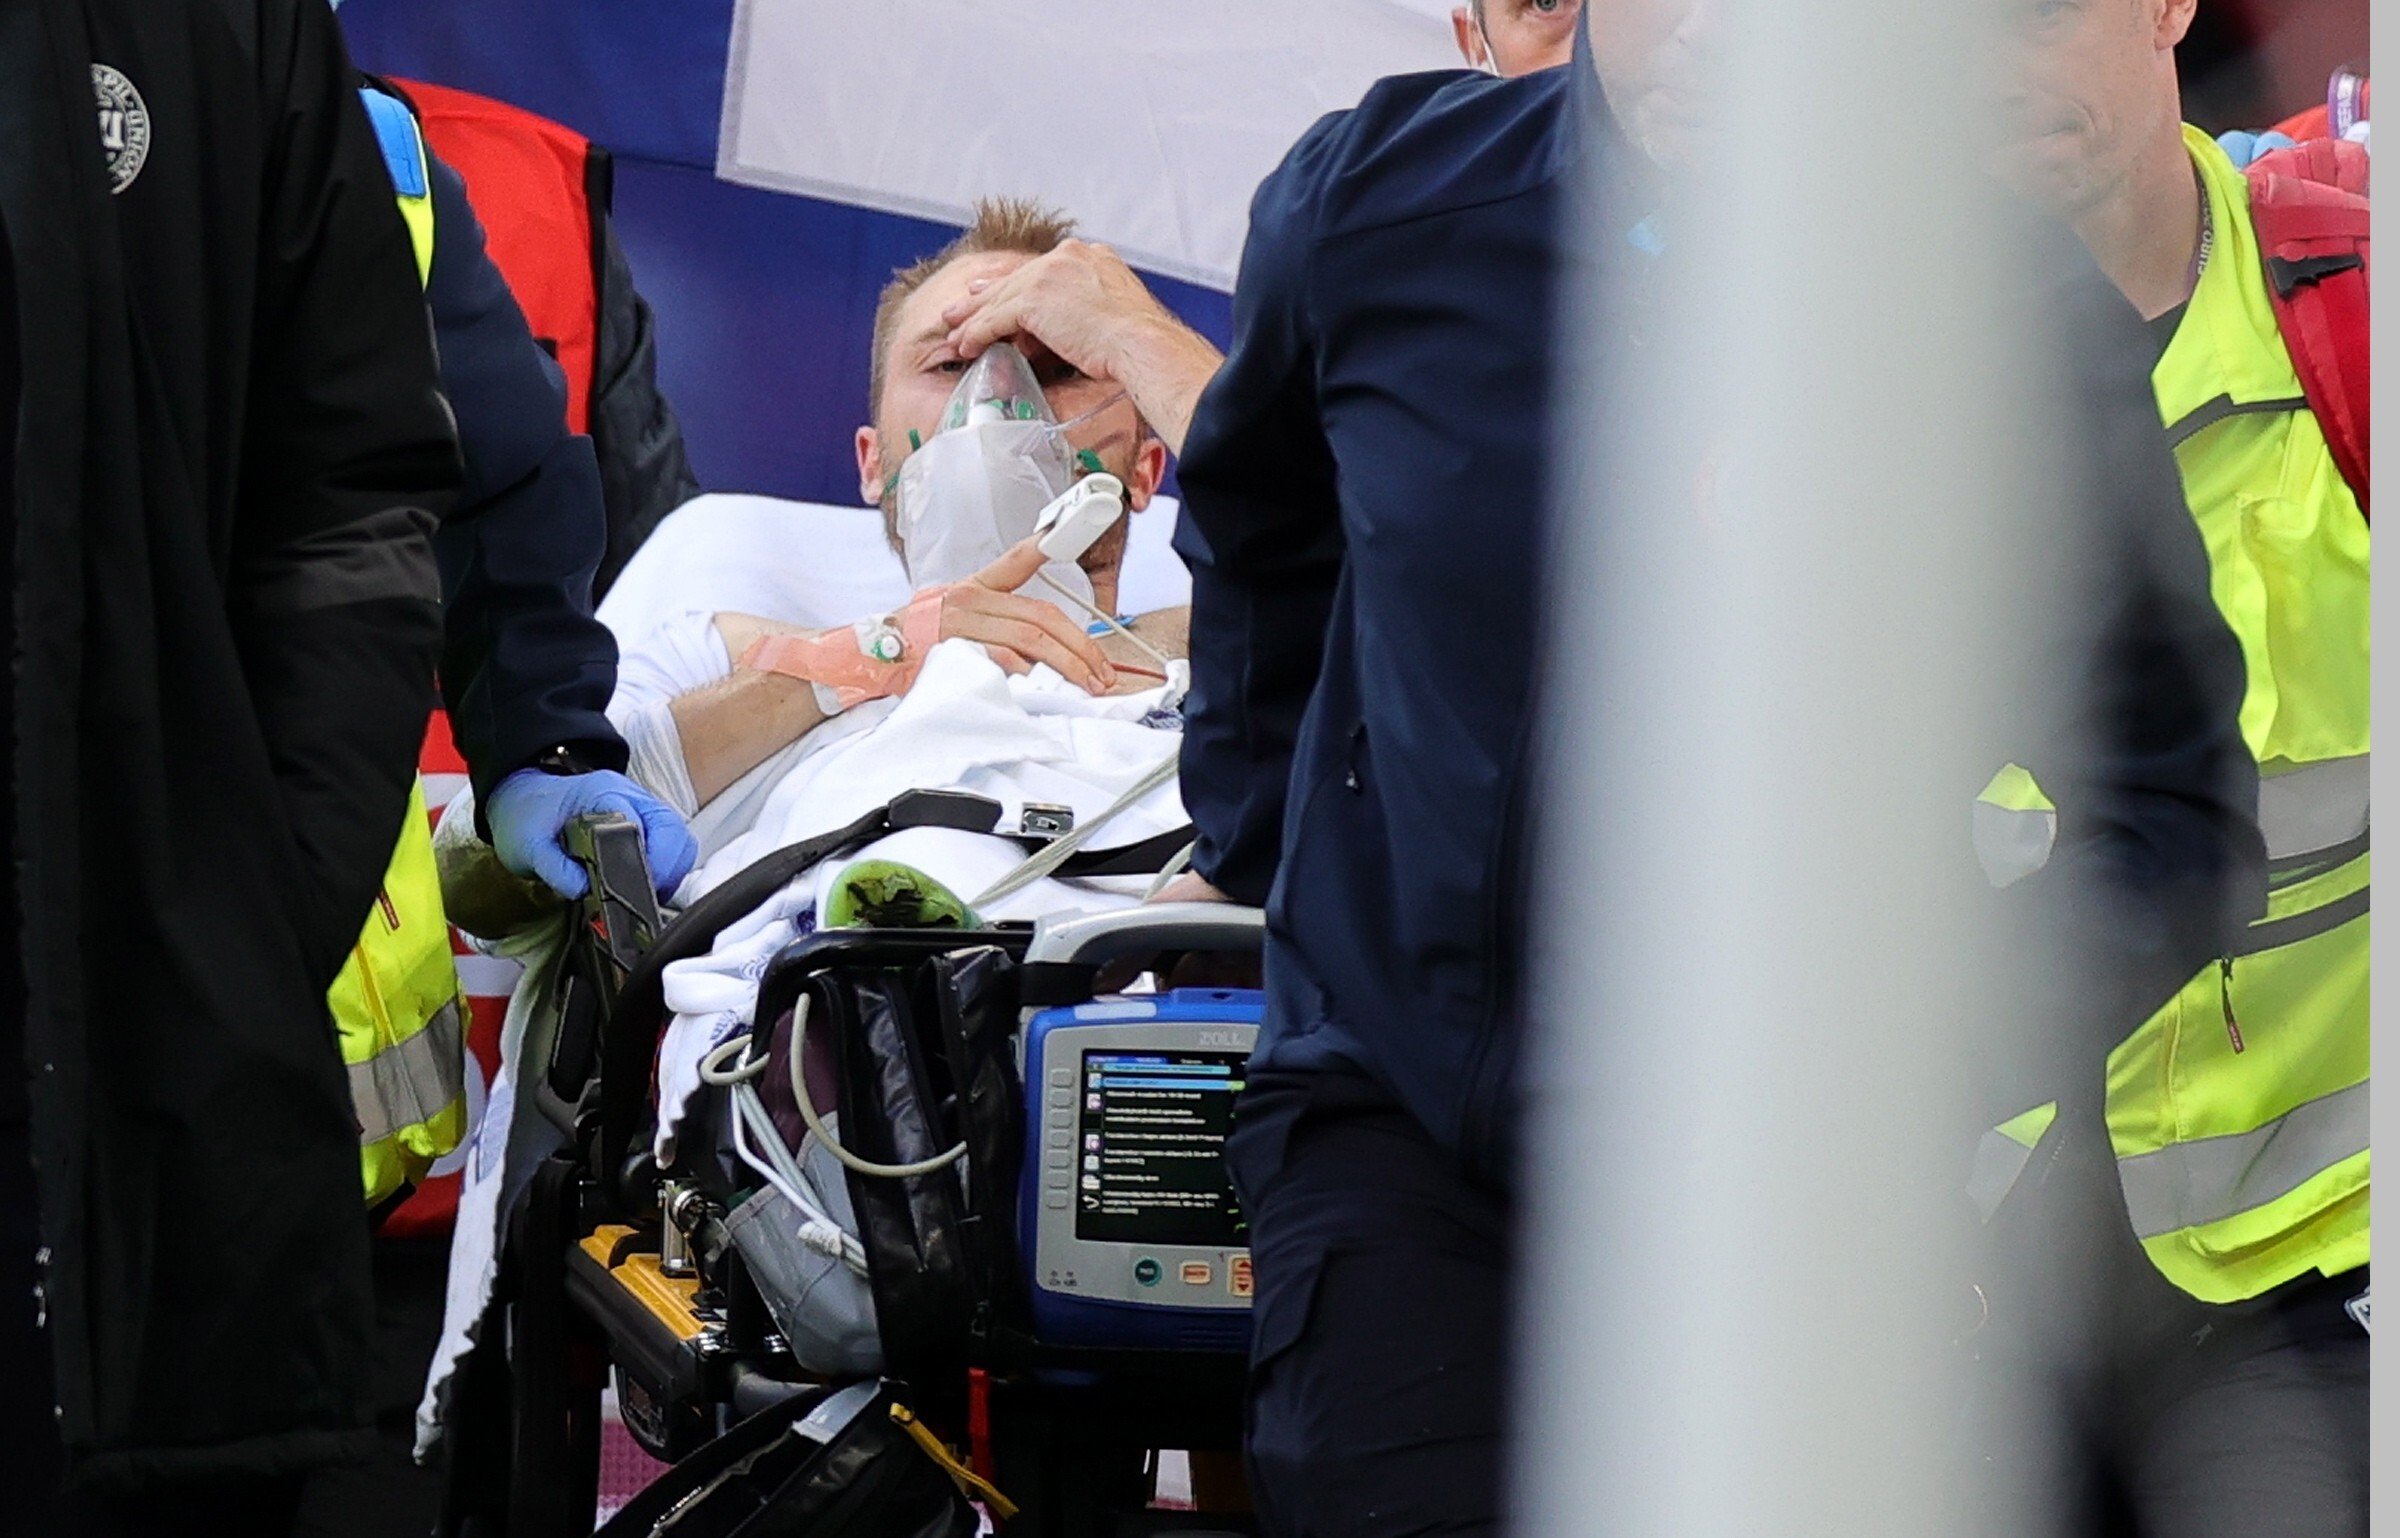 Christian Eriksen’s pulse had stopped during his rescue when Denmark played Finland in their Euro 2020 group match. Photo: EPA